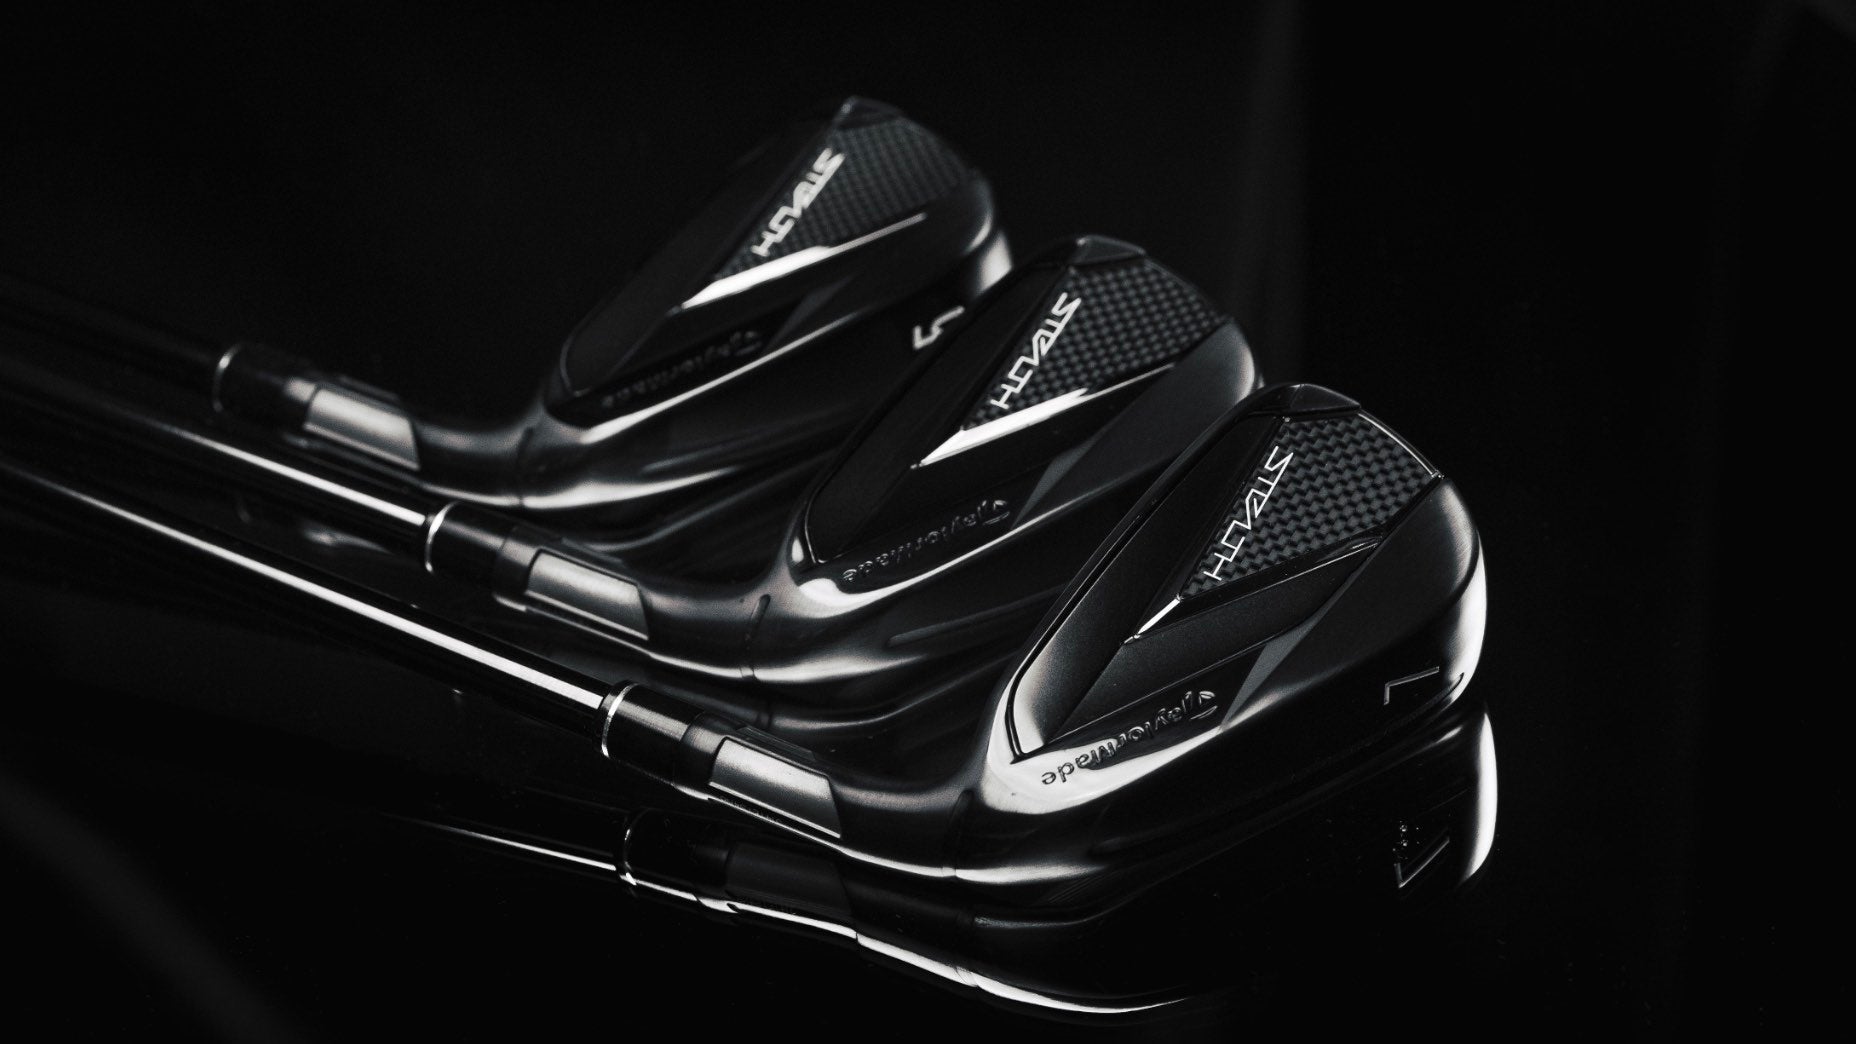 TaylorMade Stealth Black irons with black PVD finish FIRST LOOK